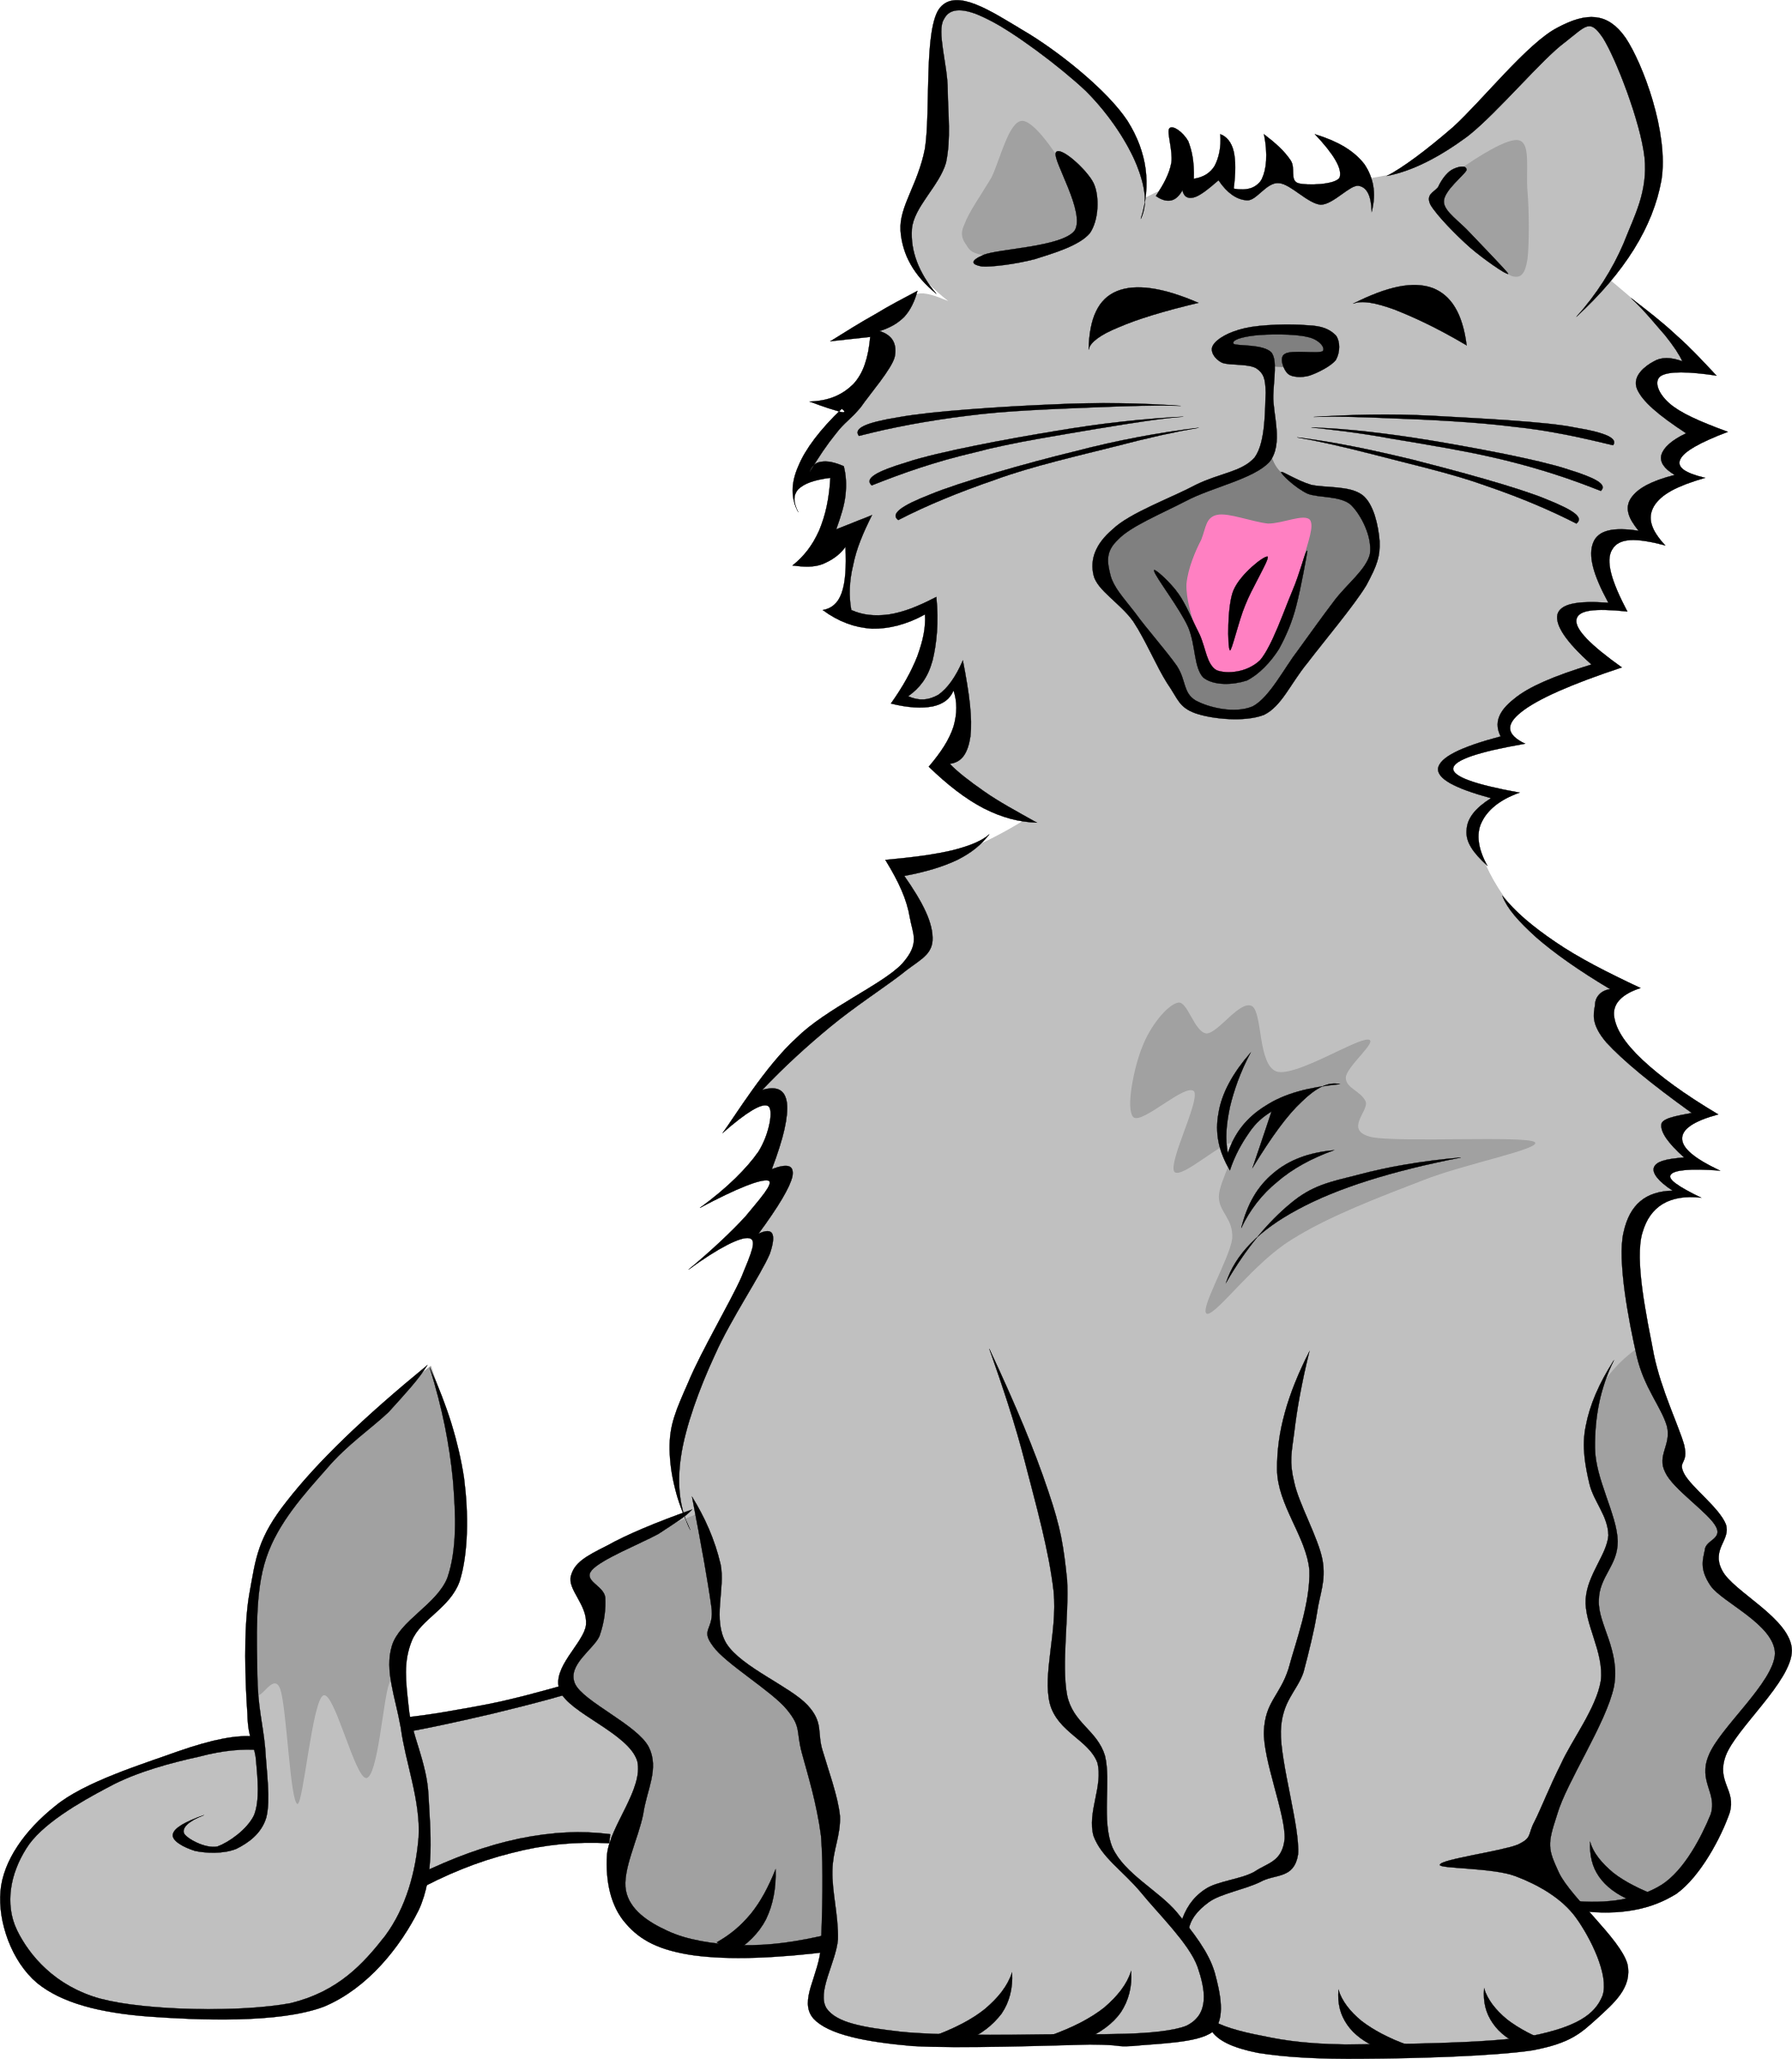 Kitten yawning big image. Cat clipart clear background